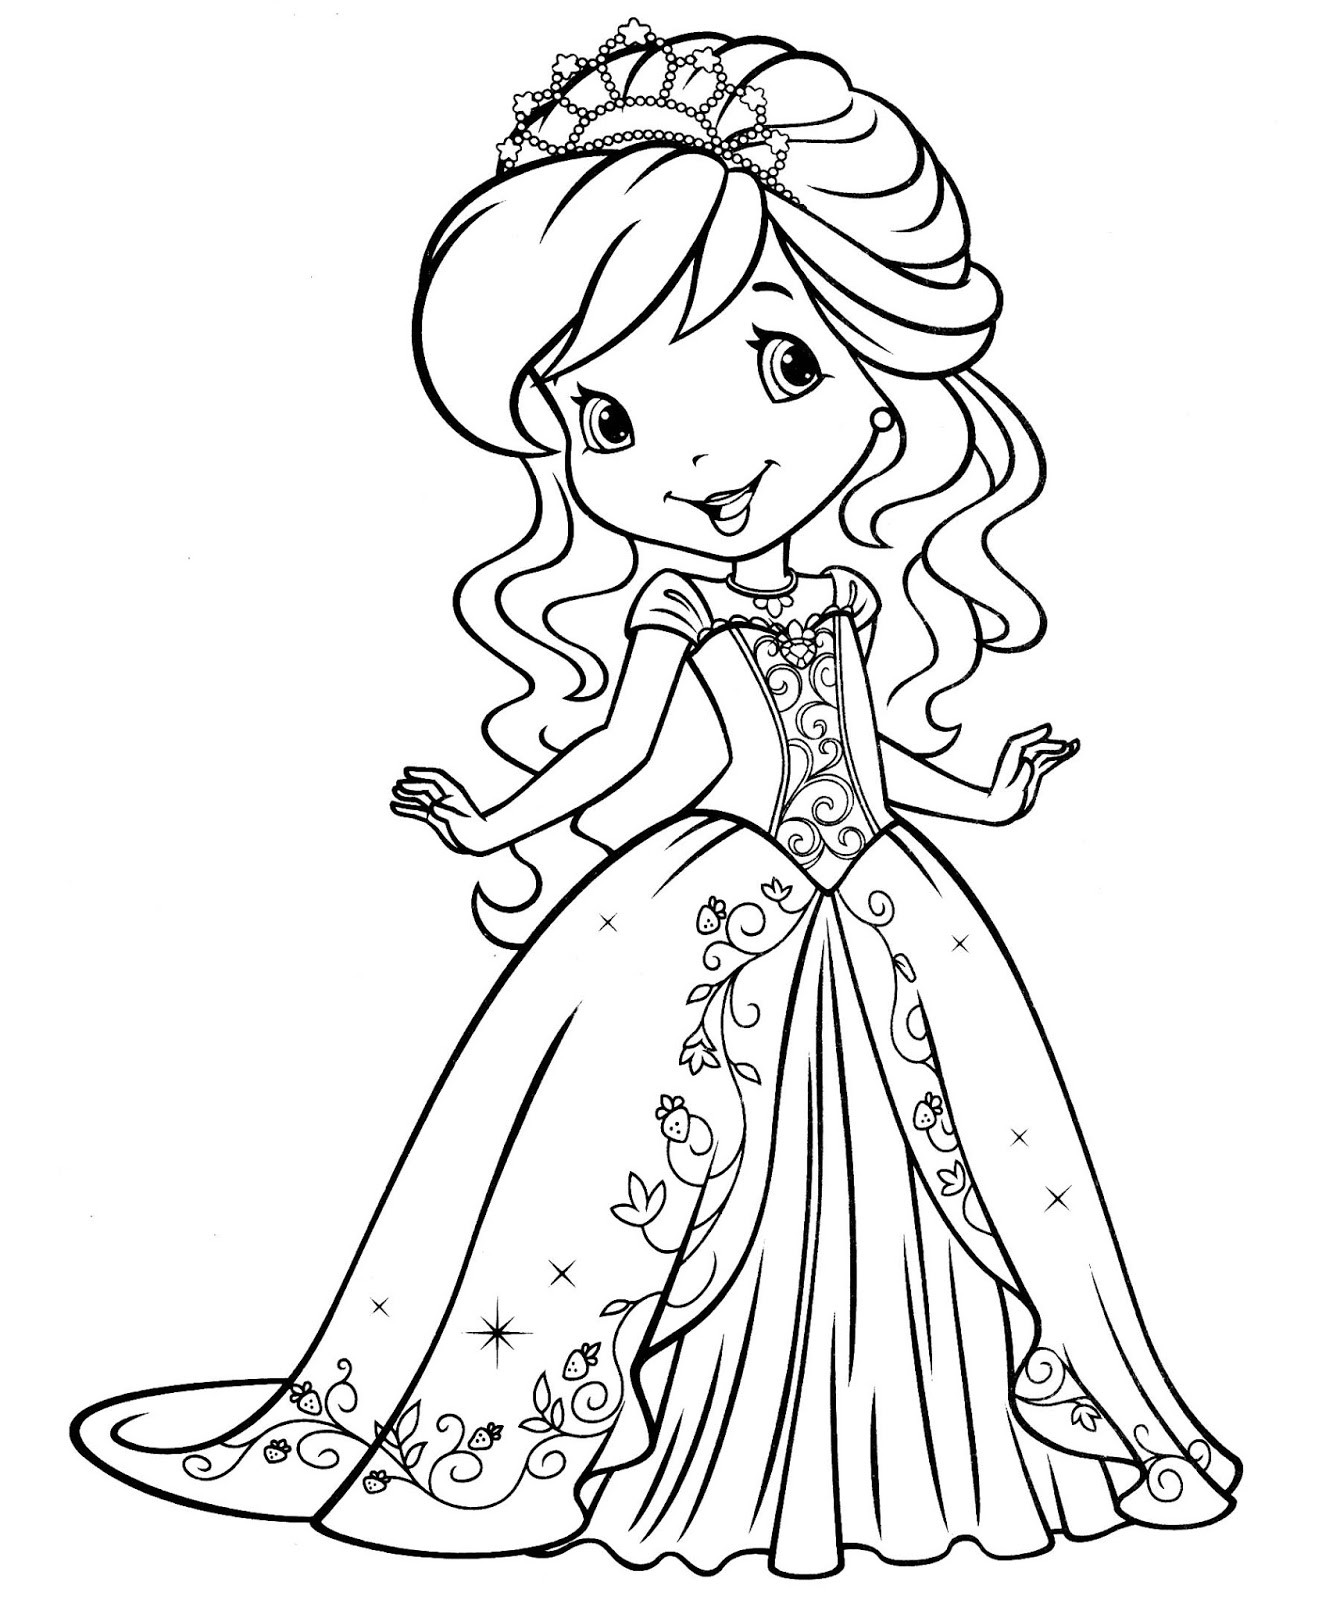 Online Printable Coloring Pages For Girls
 Coloring Pages for Girls Best Coloring Pages For Kids